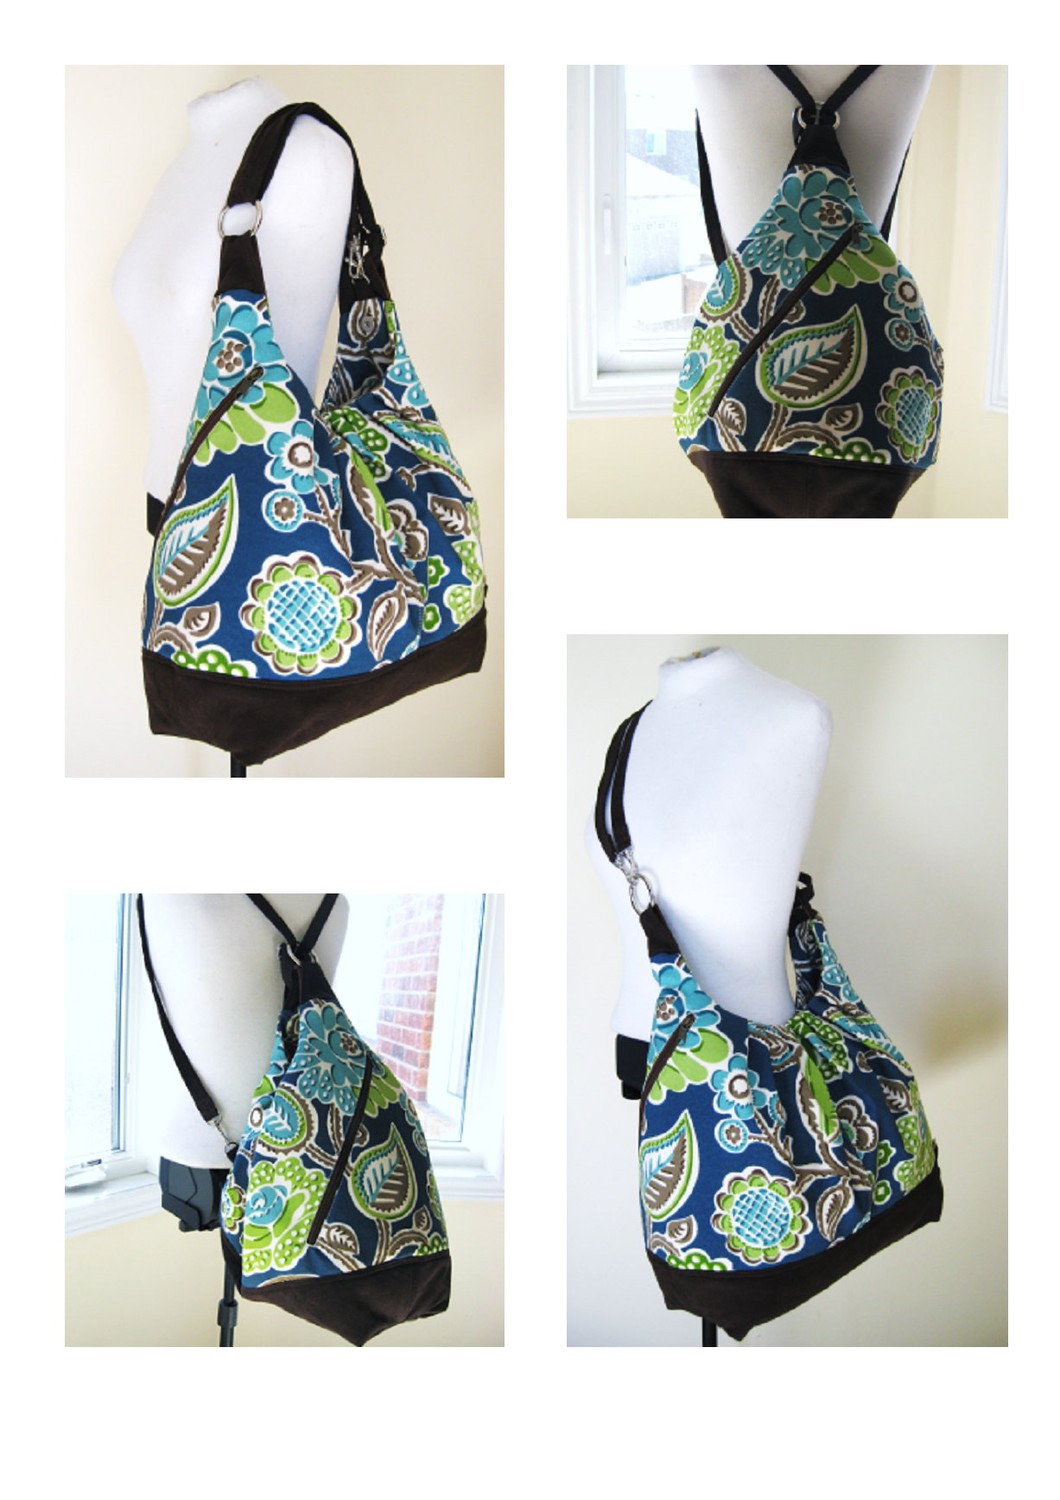 Blue Floral Canvas Bag With Leather Straps, Base, & Zipper Top Closure Xl Convertible Backpack Purse - Sky Pool